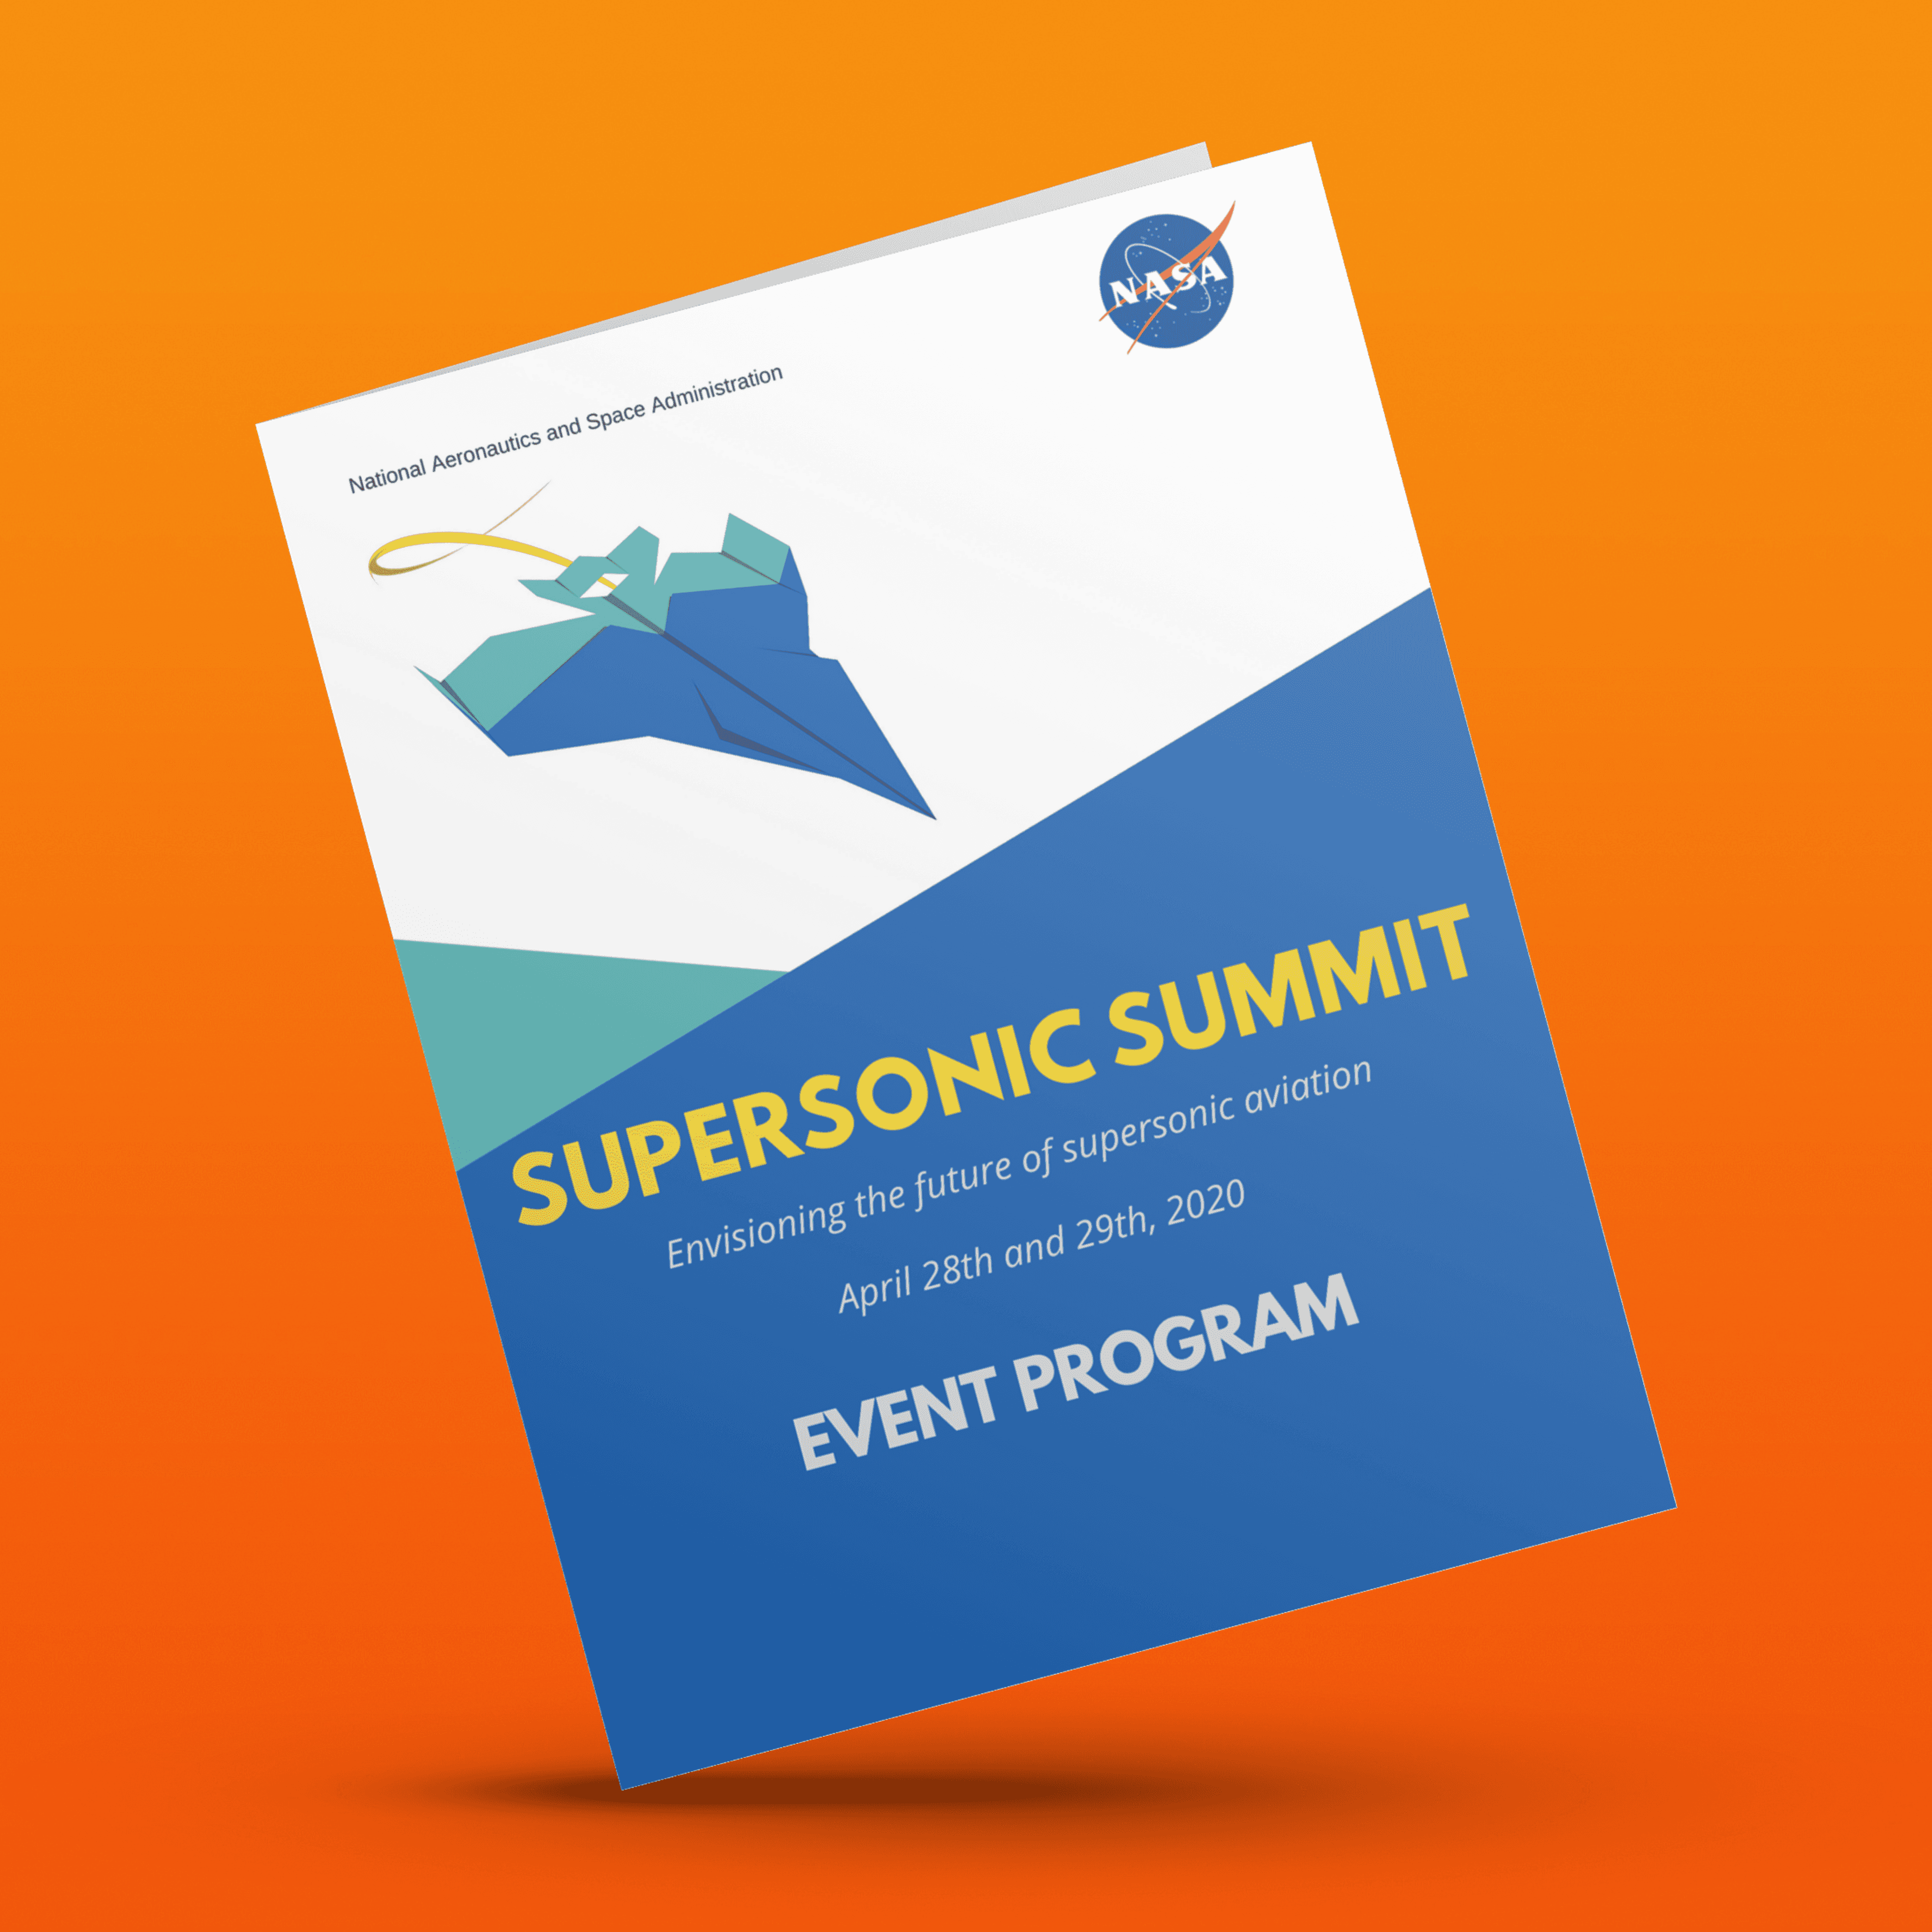 A brochure mockup with "Supersonic Summit" as the title and "envisioning the future of supersonic aviation" as the subtitle.